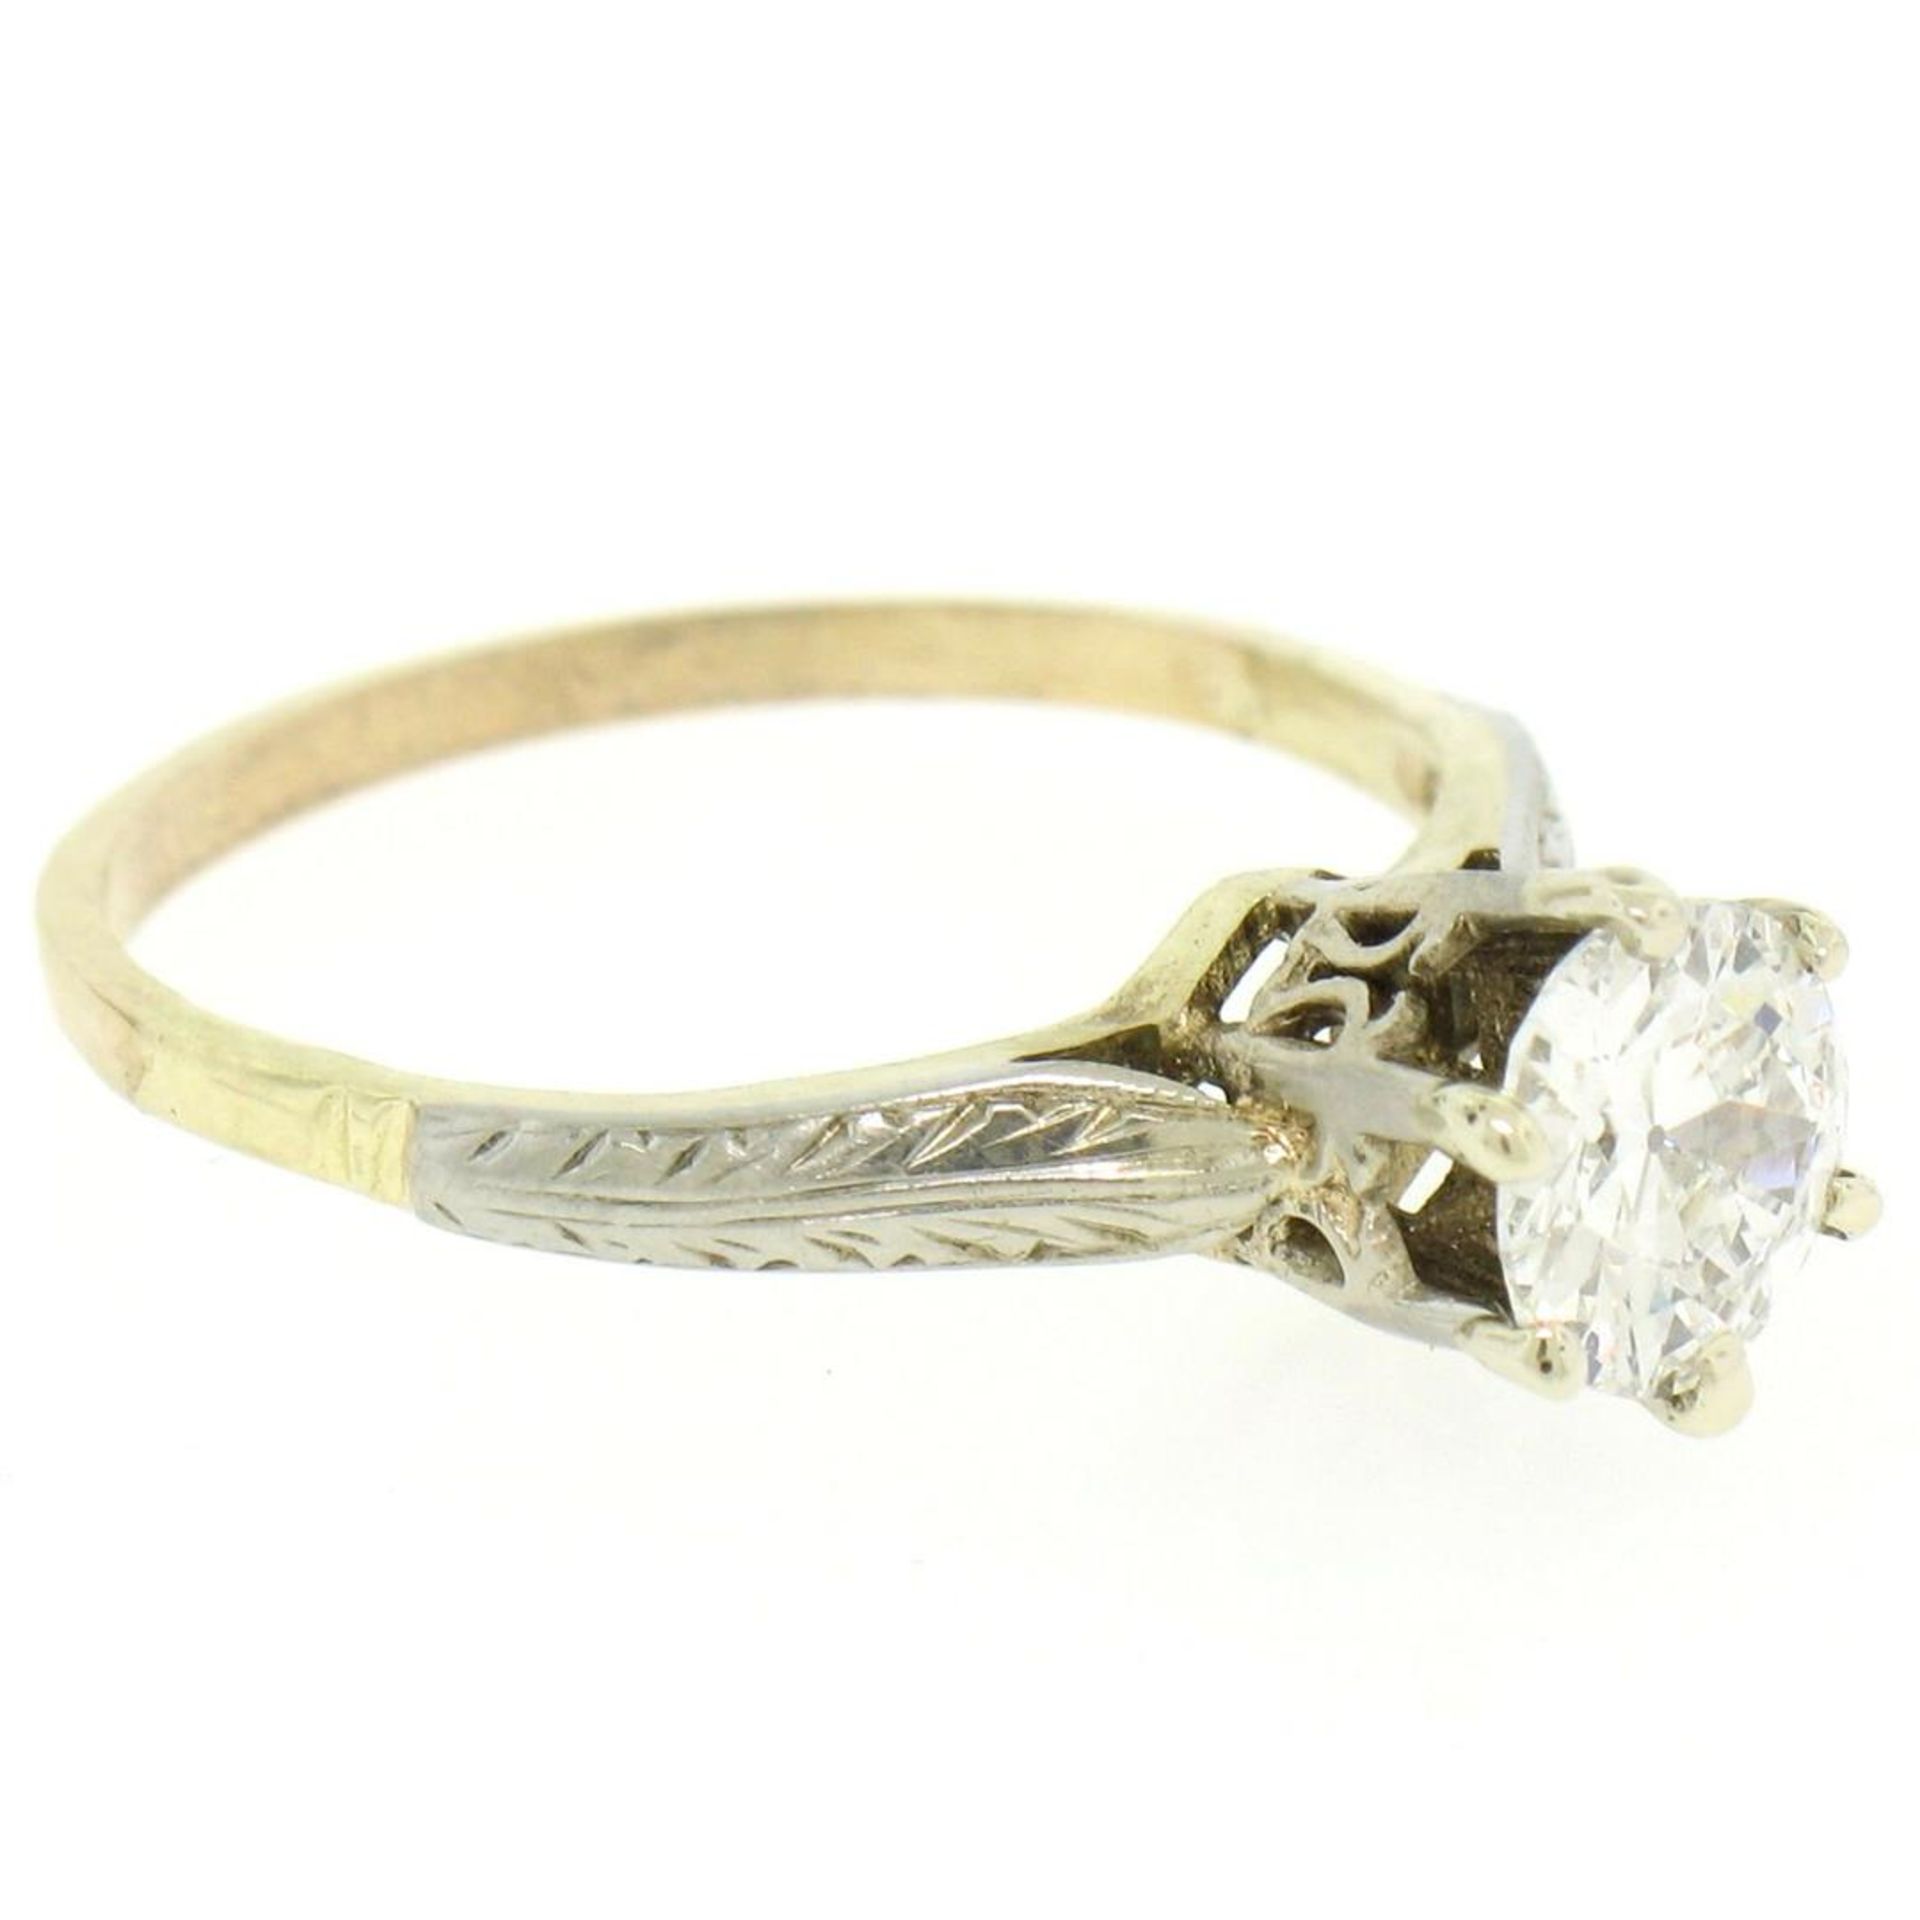 Etched 14k TT Gold .80 ct European Cut Diamond Solitaire Engagement Ring - Image 7 of 7